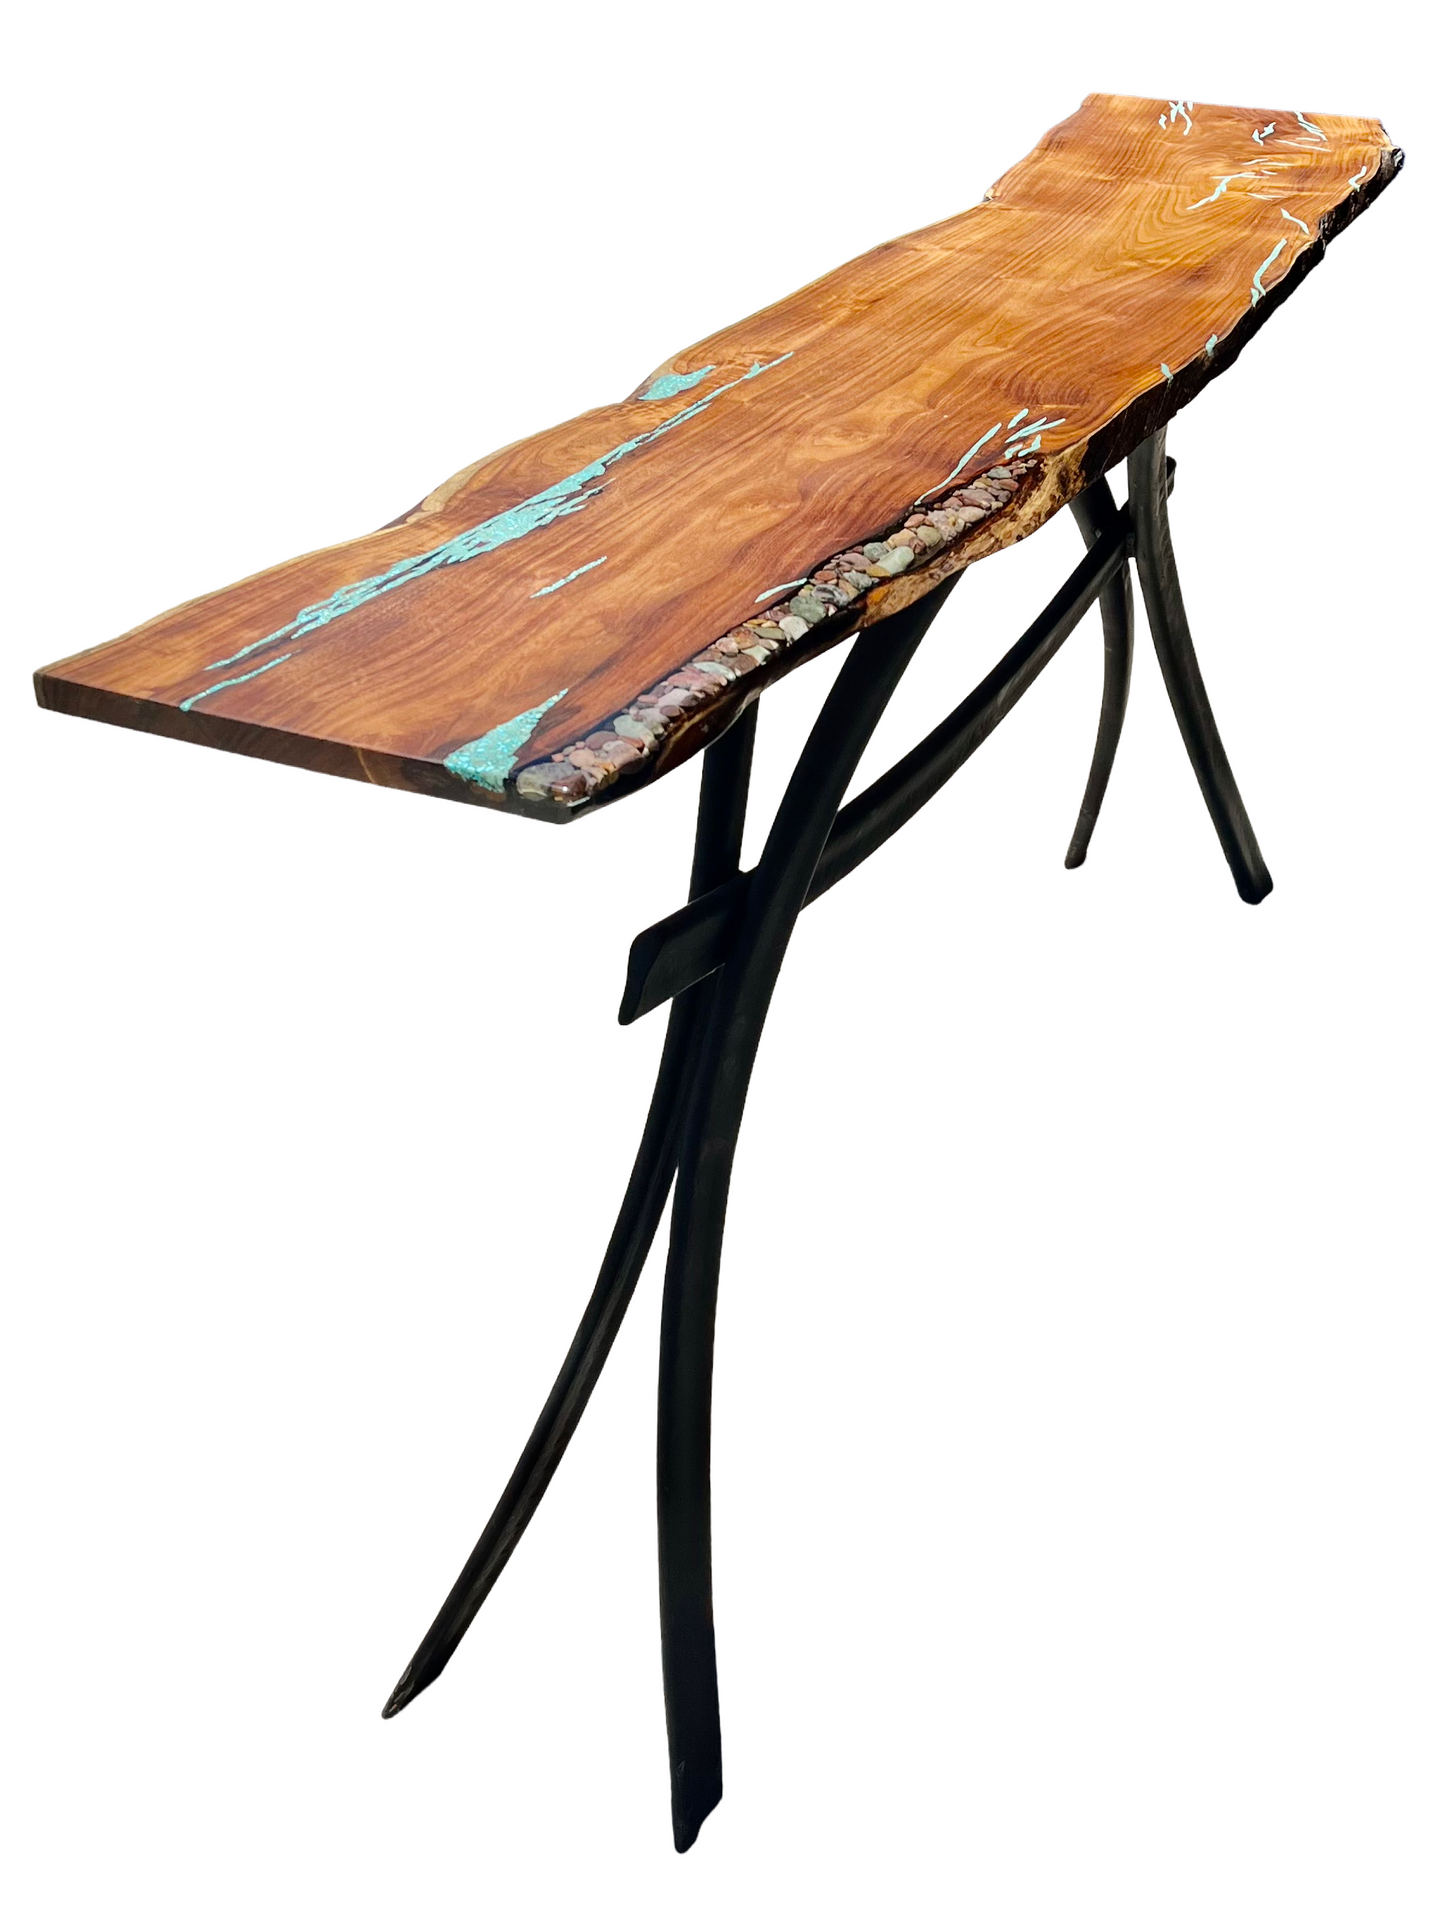 Natural Edge Sofa Table with River Rock and Turquoise Combination Inlay